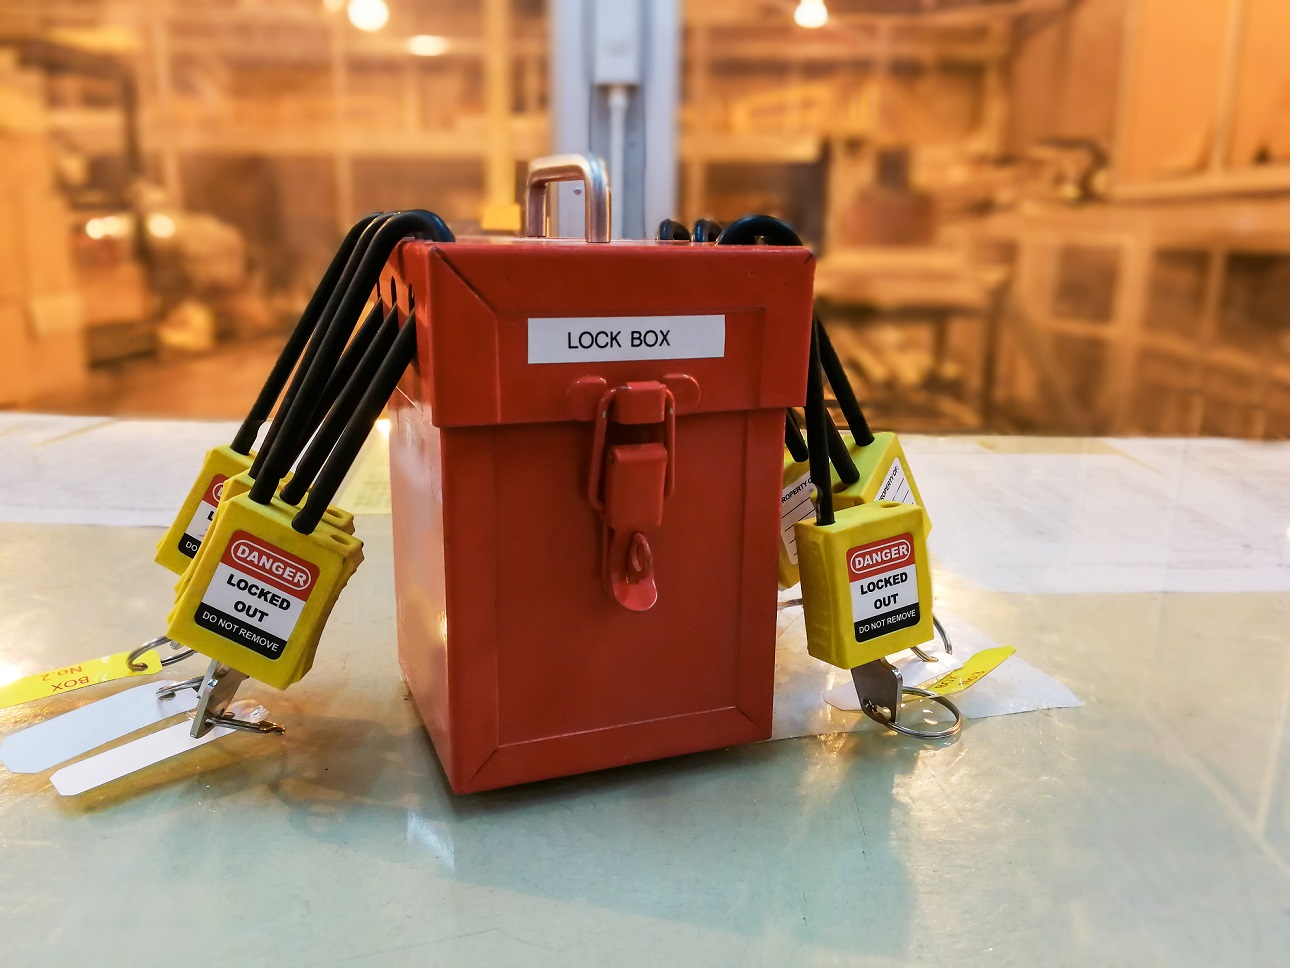 What Must be Done to Perform Lockout Tagout Audits?